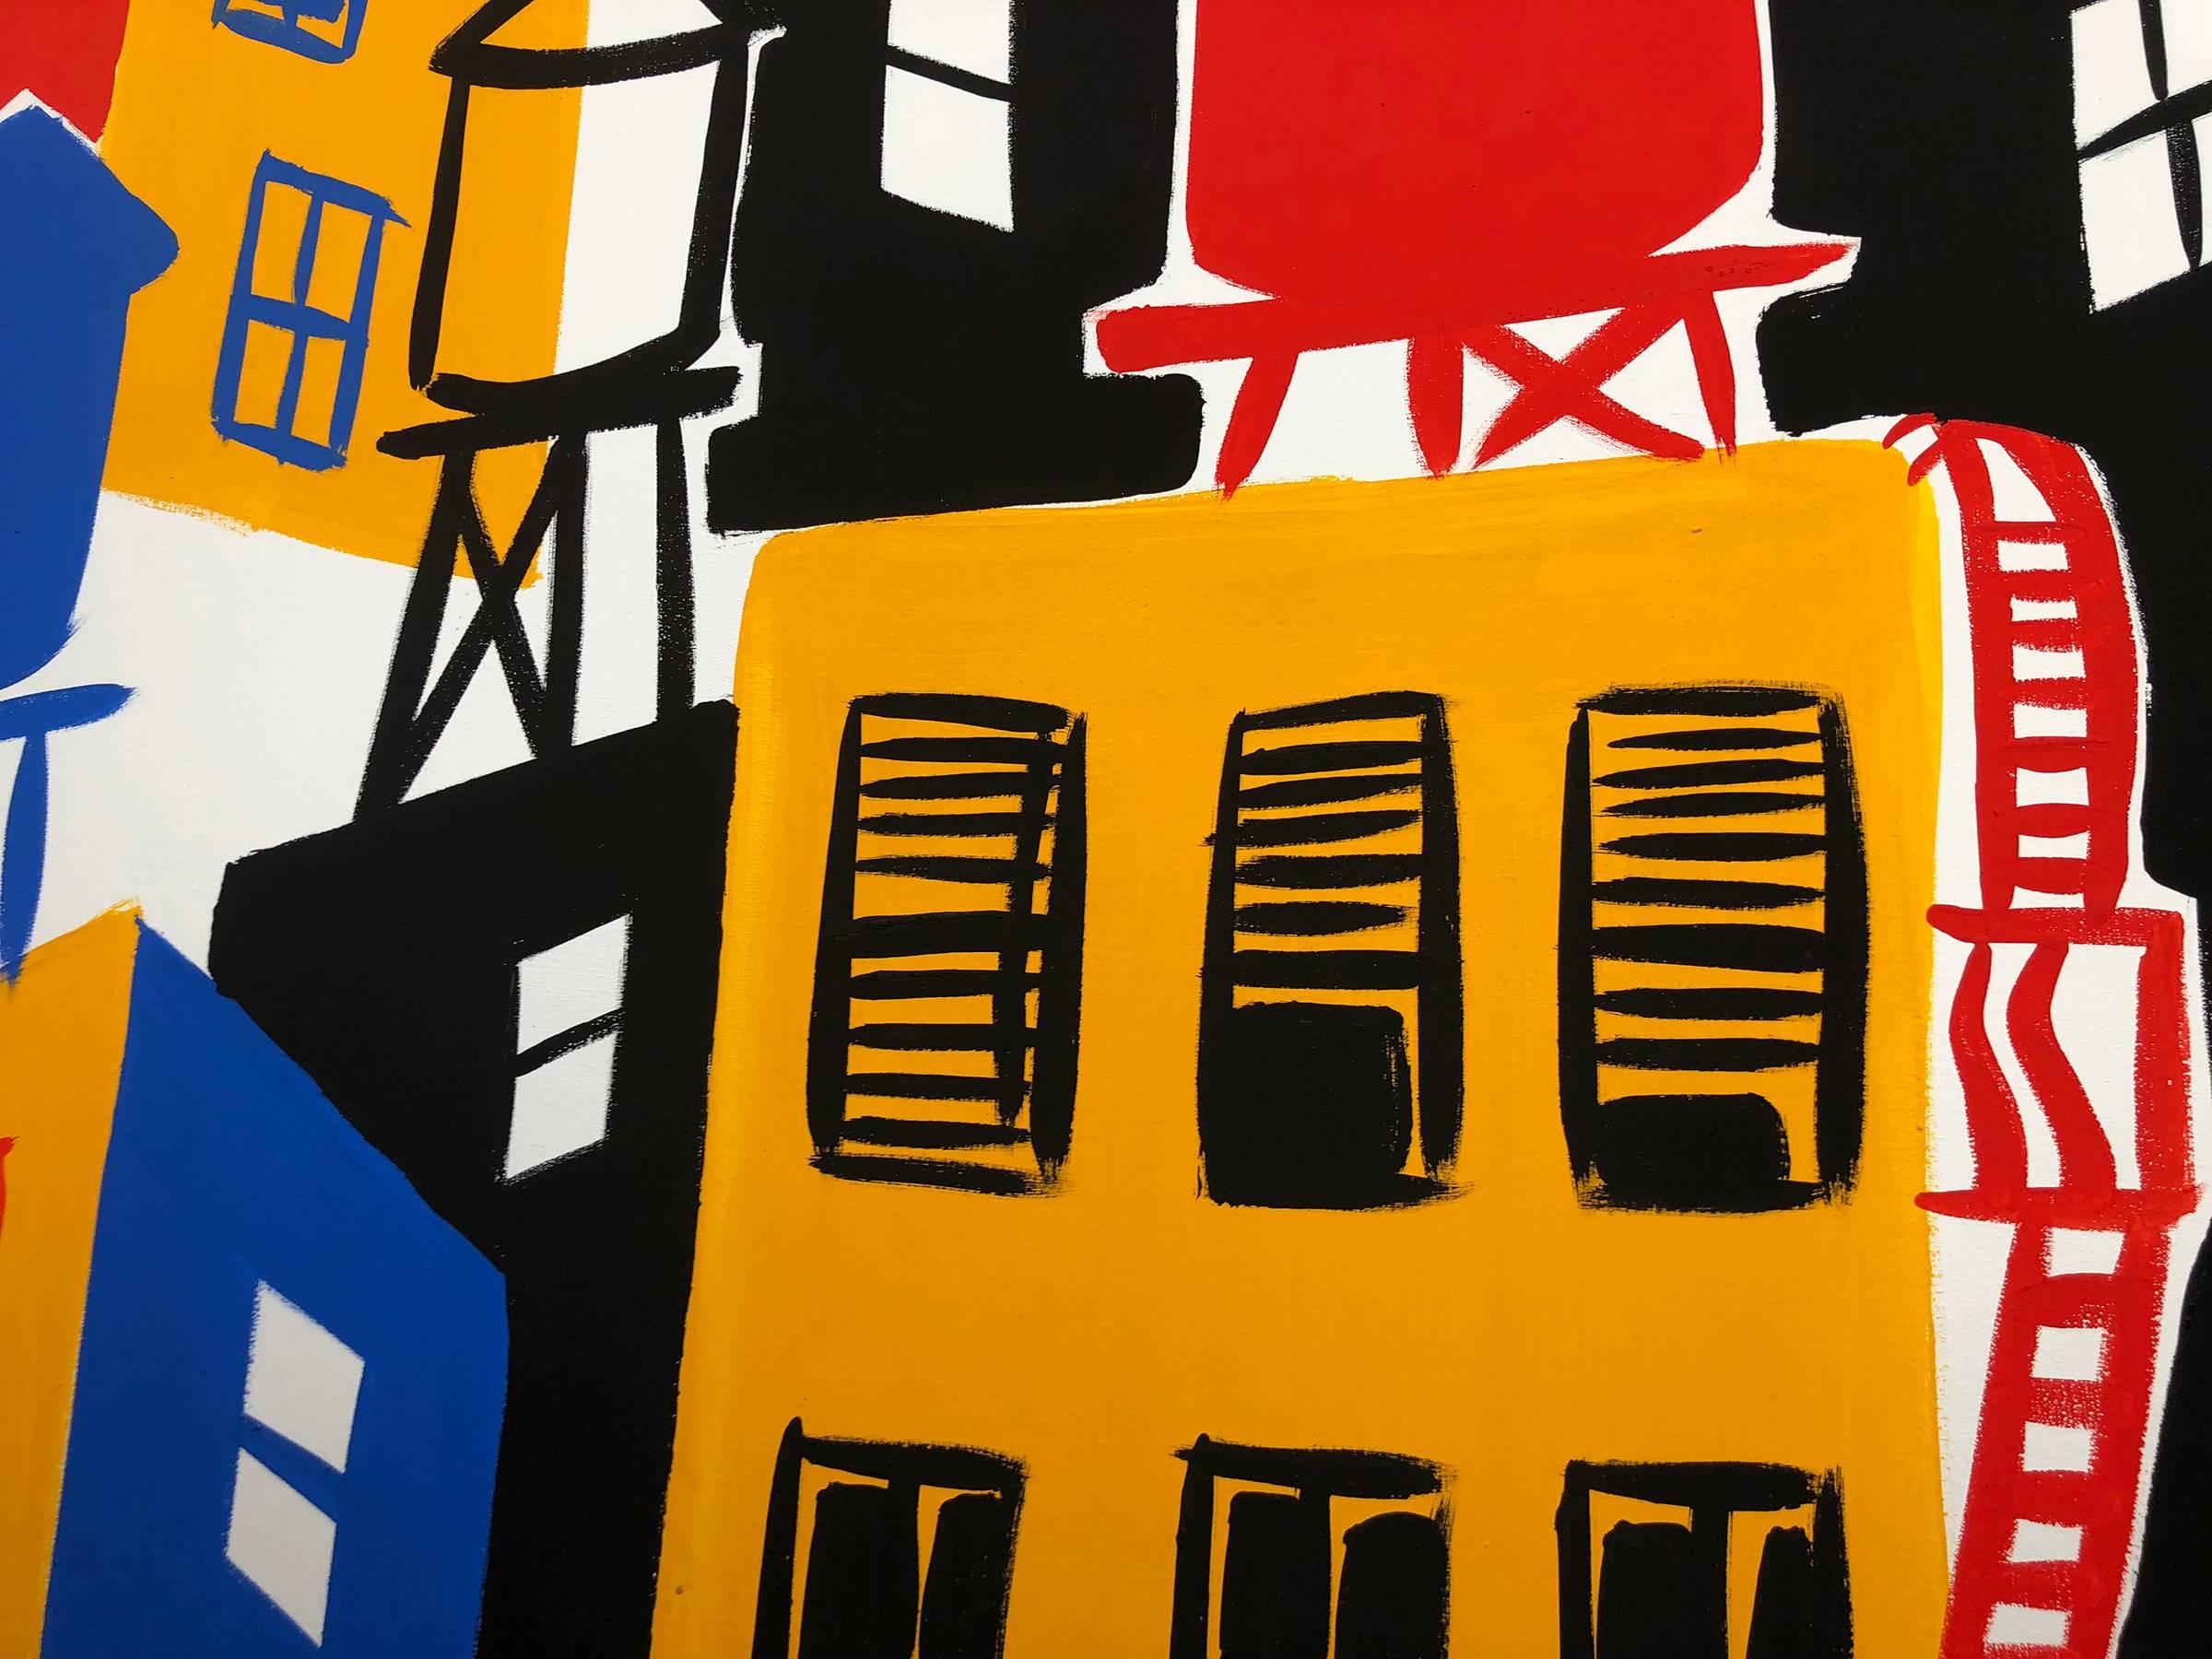 New York City - Pop Art Painting by Tom Slaughter